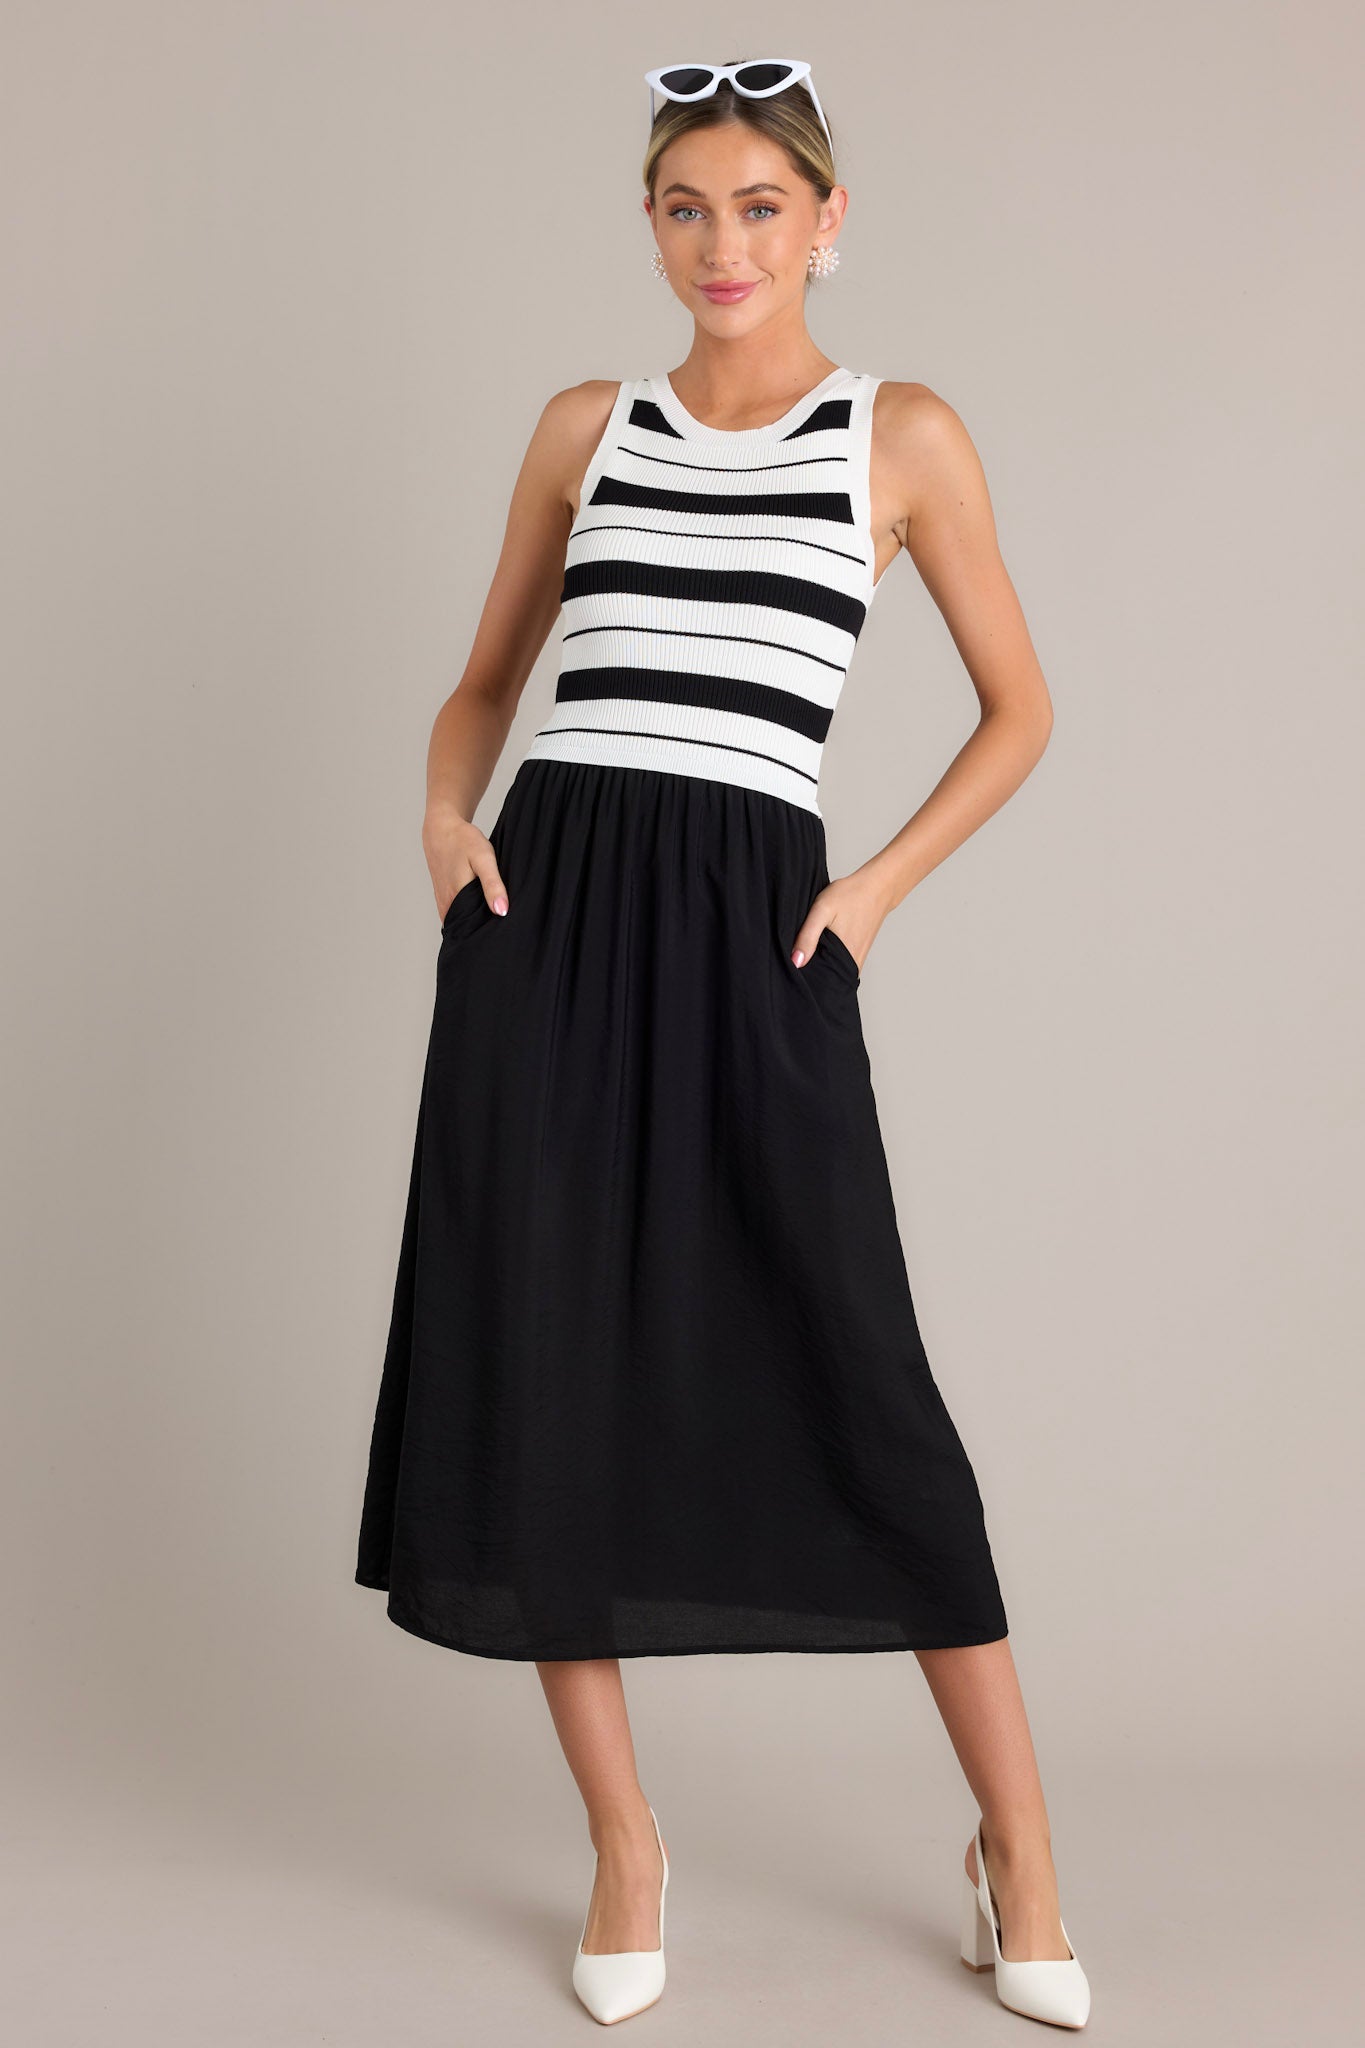 This black striped midi dress features a crew neckline, a striped sweater like bodice, a solid colored skirt, functional hip pockets, and a sleeveless design.